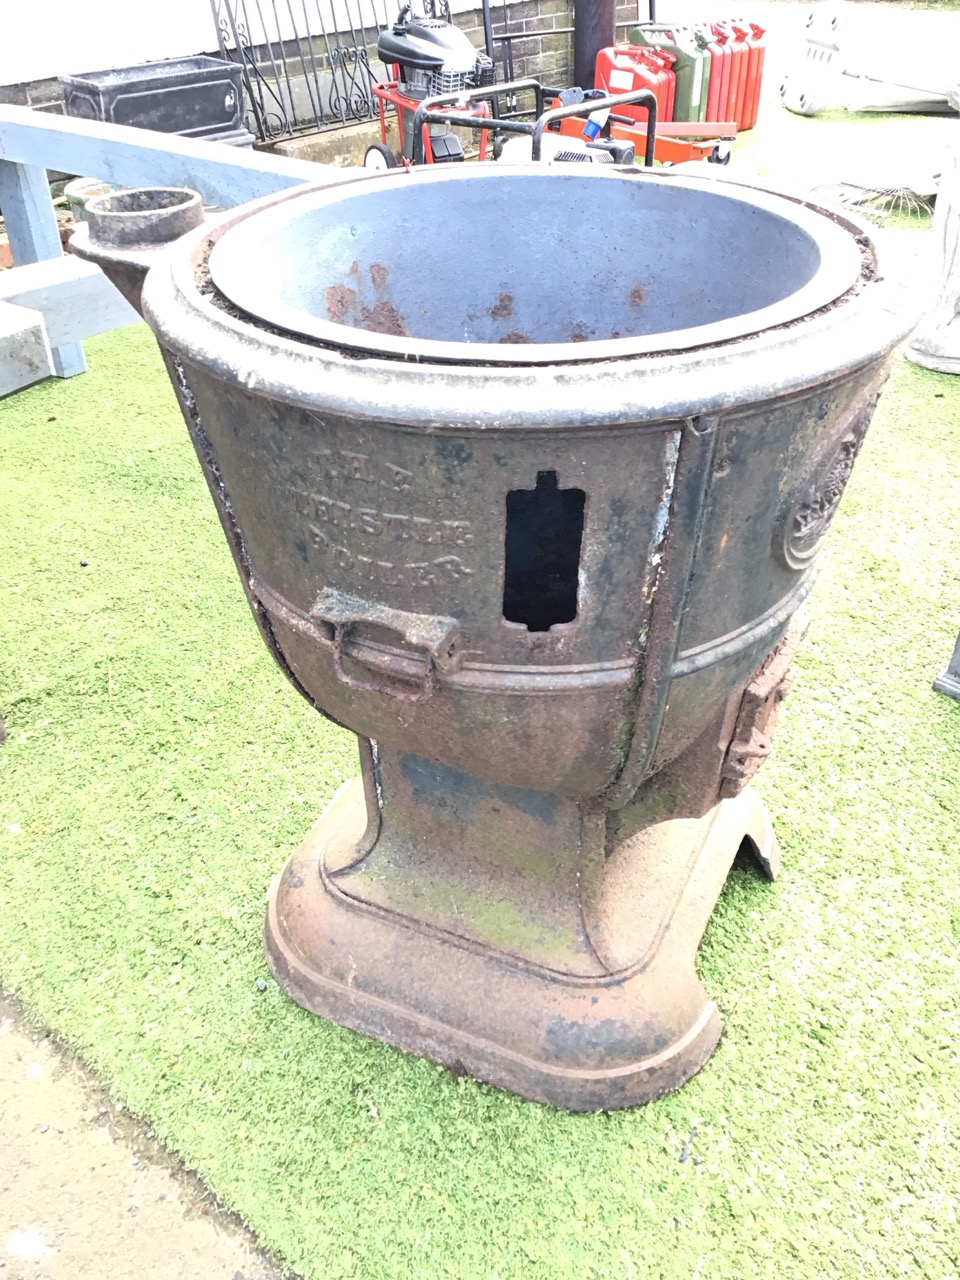 A Victorian cast iron boiler - The Thistle, with cauldon shaped flat rimmed vessel having copper tap - Image 2 of 3